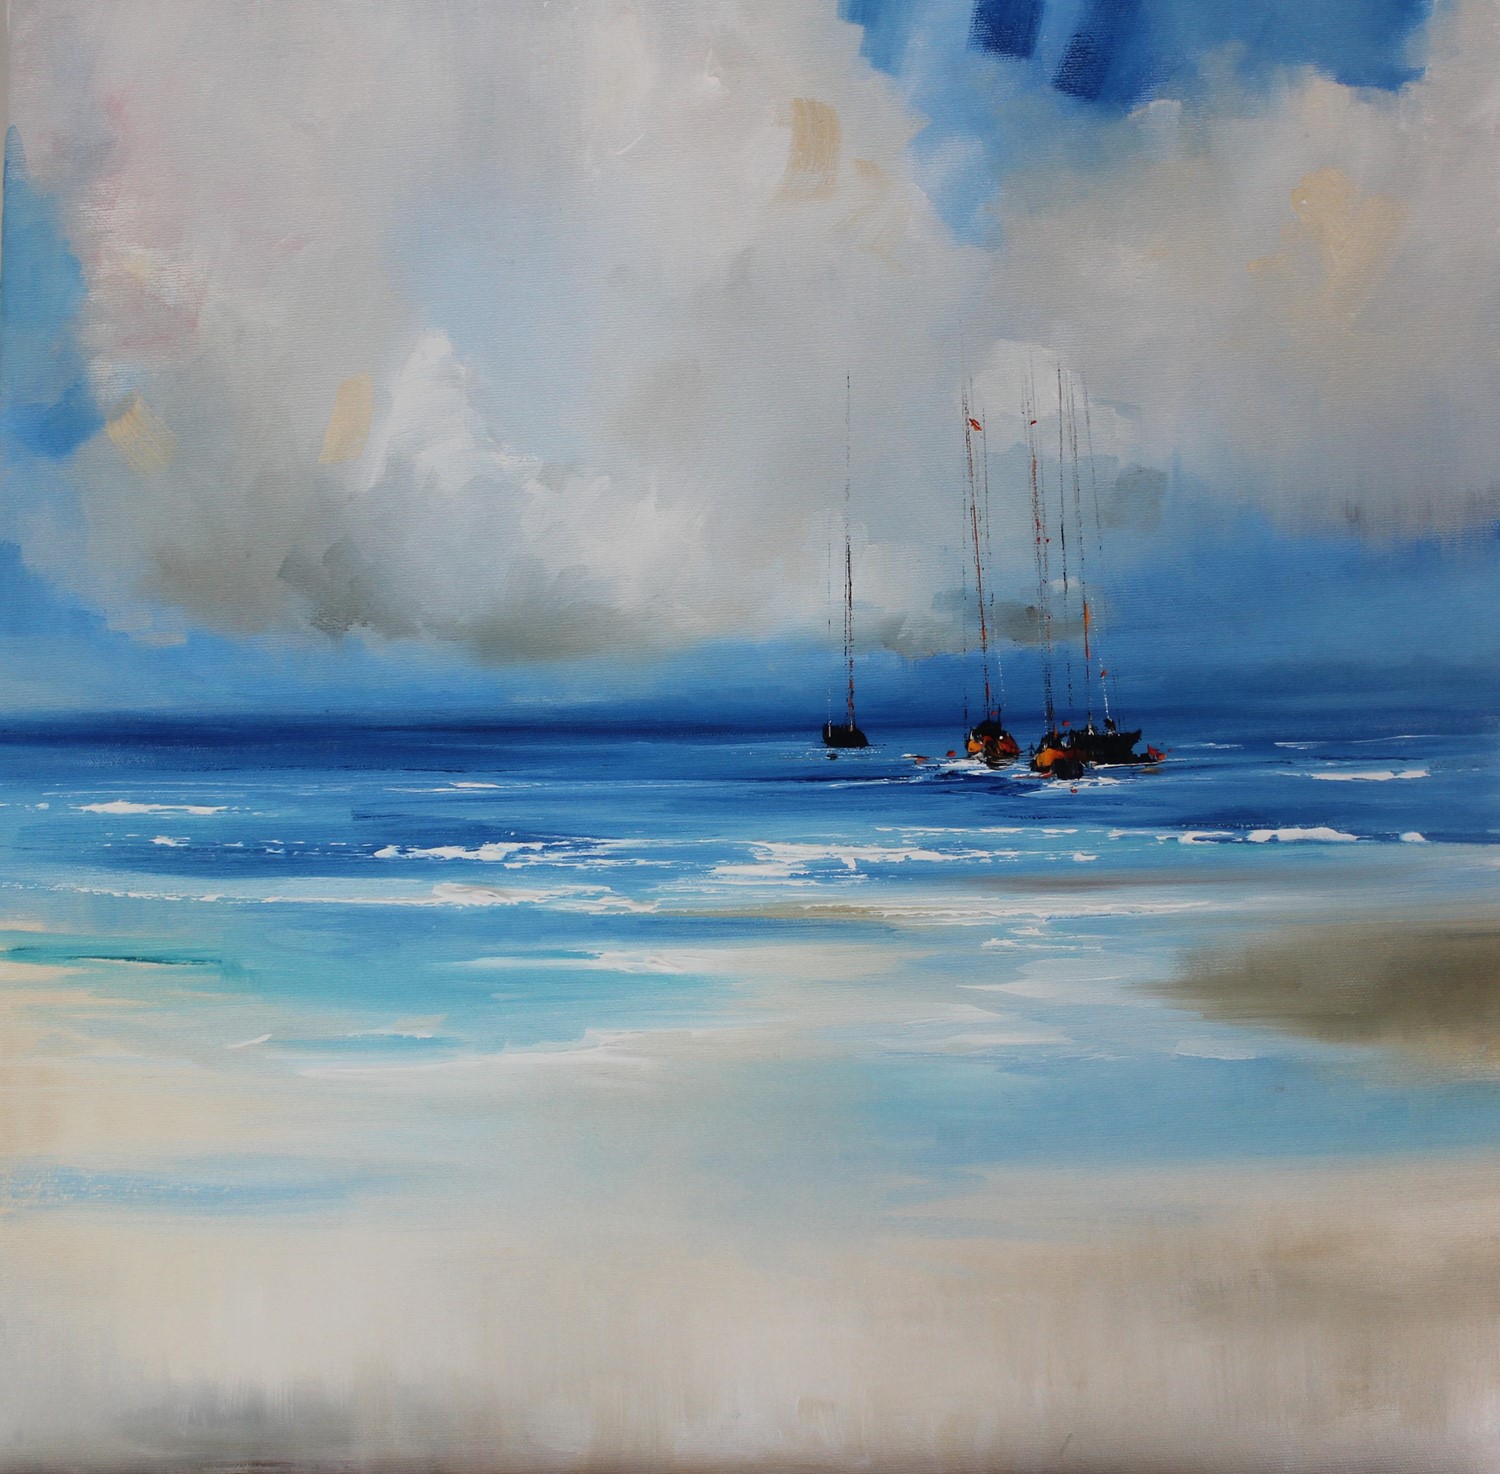 'Yachts and blustery clouds' by artist Rosanne Barr